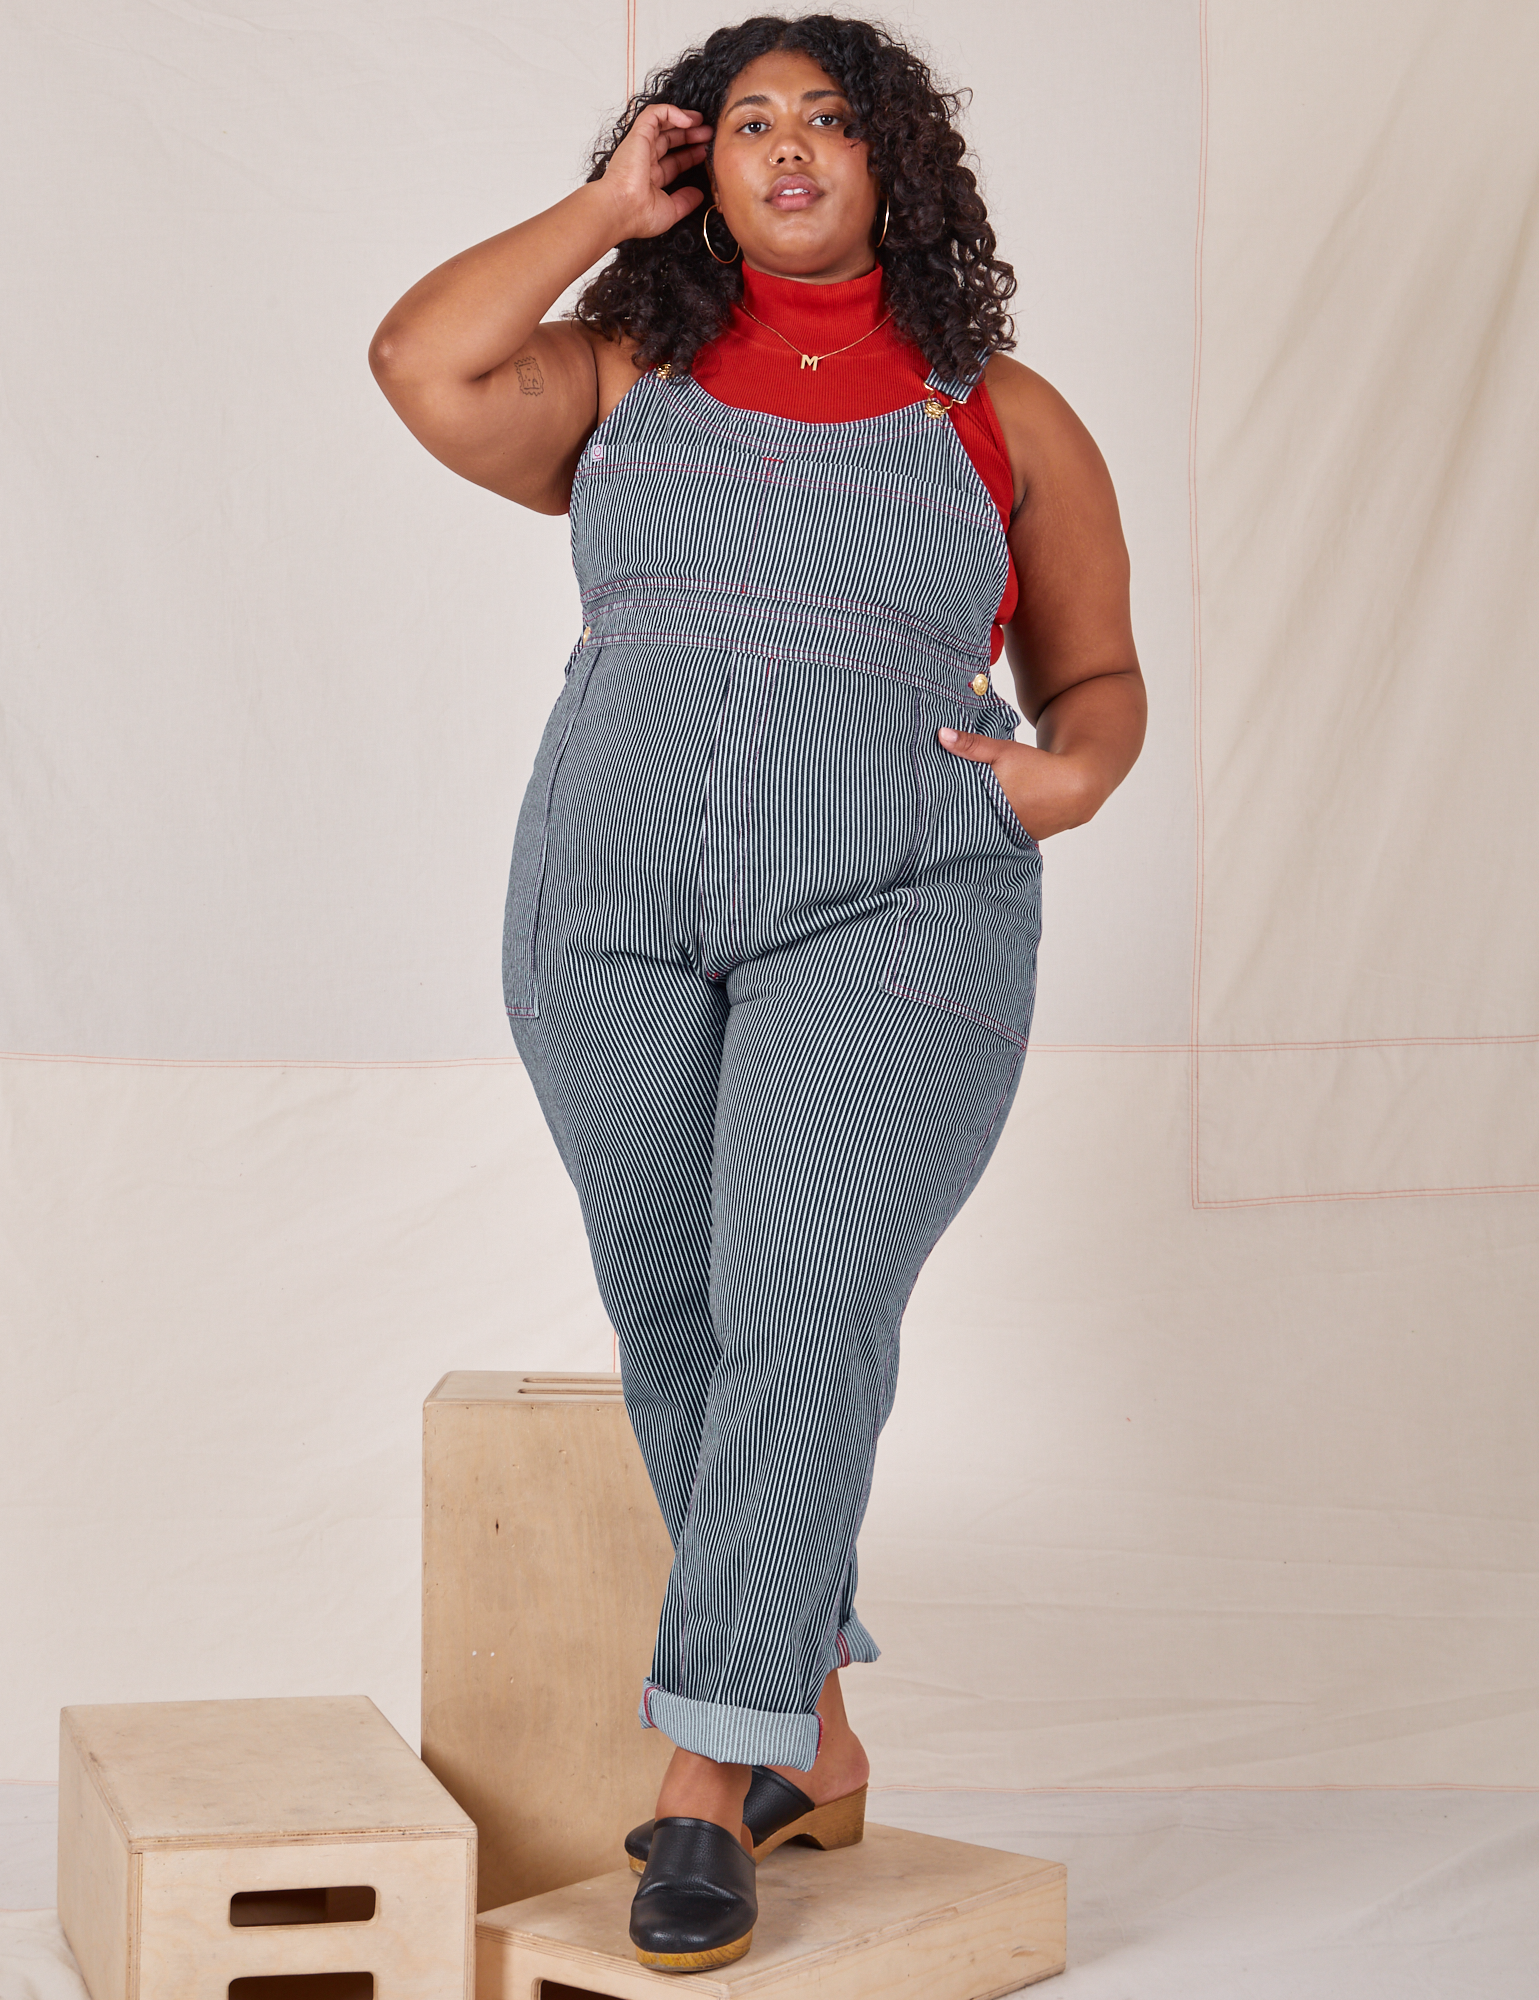 Morgan is 5&#39;5&quot; and wearing 1XL Railroad Stripe Denim Original Overalls paired with a paprika Sleeveless Turtleneck